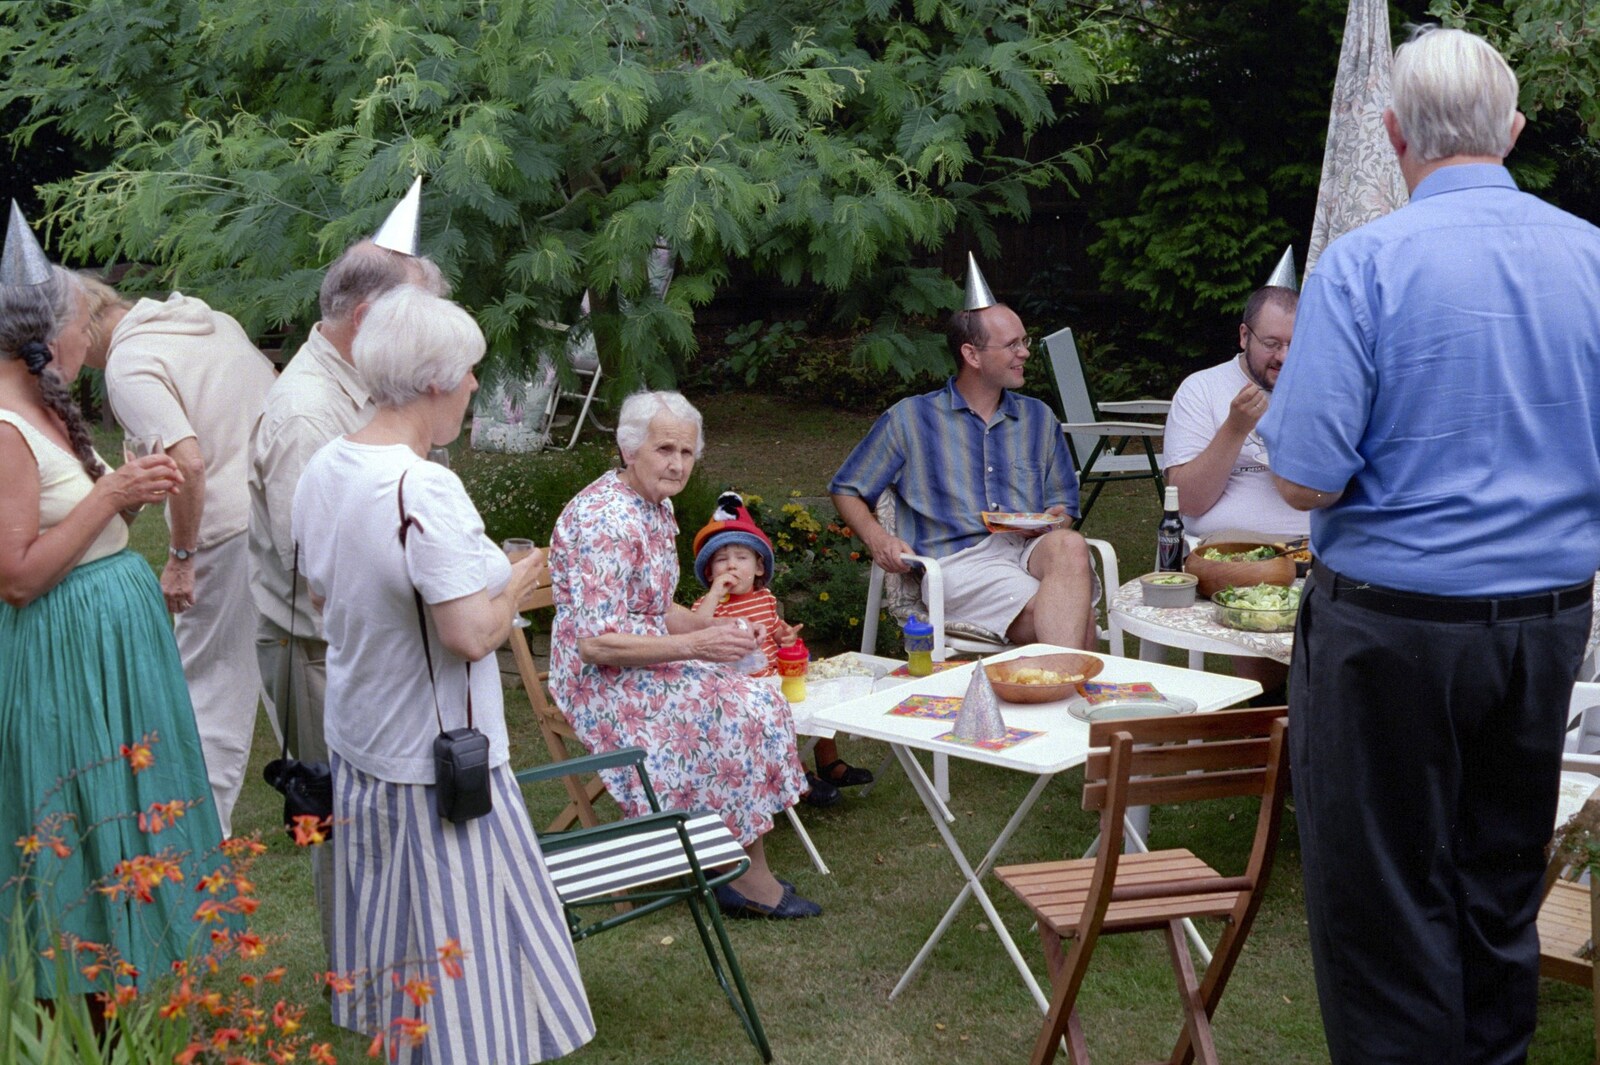 Party guests in the garden from Kai's 2nd and a Bit of Archery, Hampshire and Suffolk - 13th August 2000